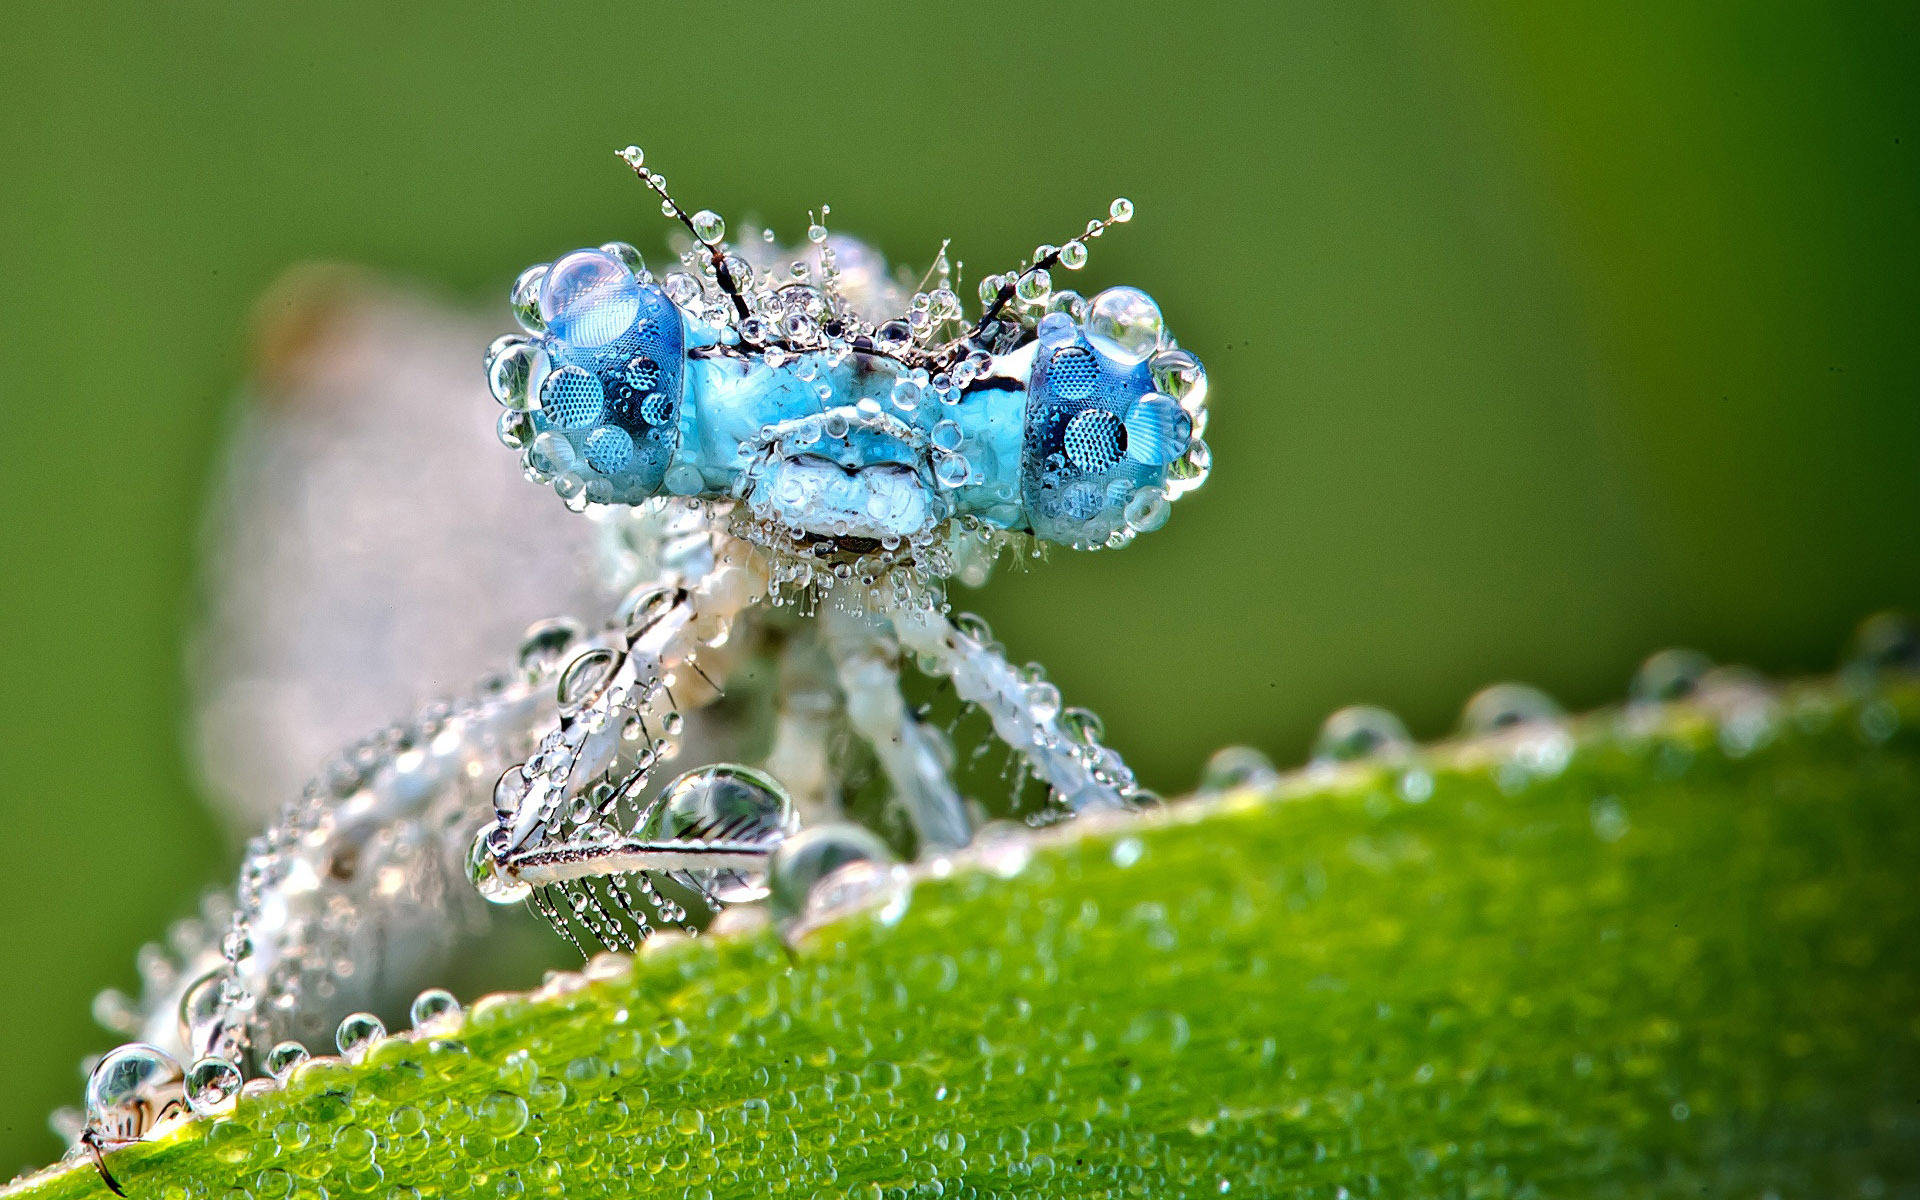 Dragonfly With Water Droplets